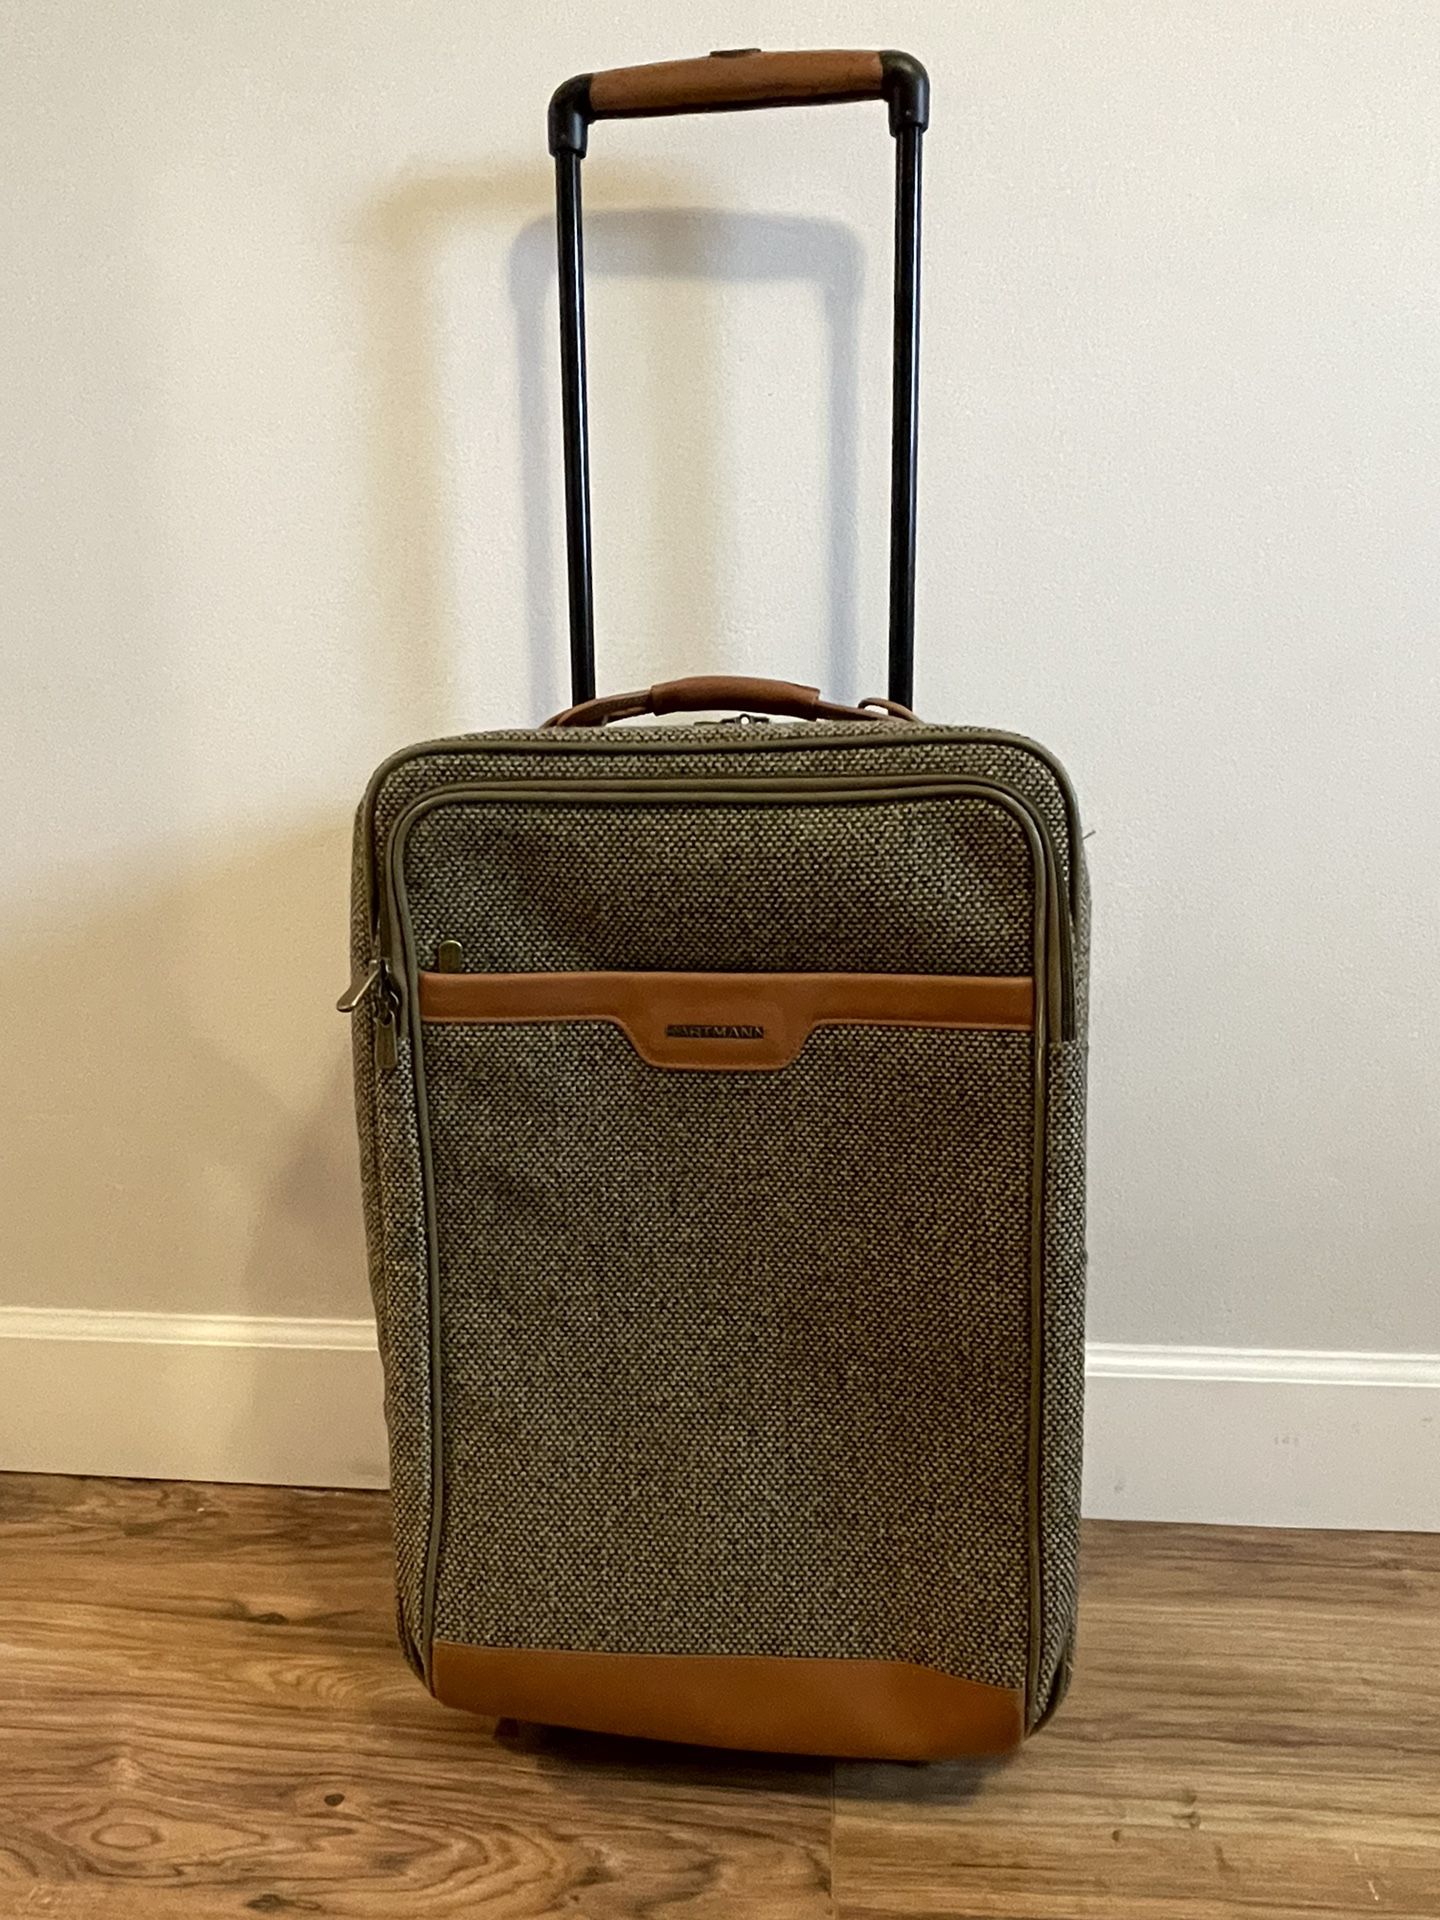 Hartmann Tweed with Belting Leather Trim 22” Upright Carry On Wheeled Suitcase